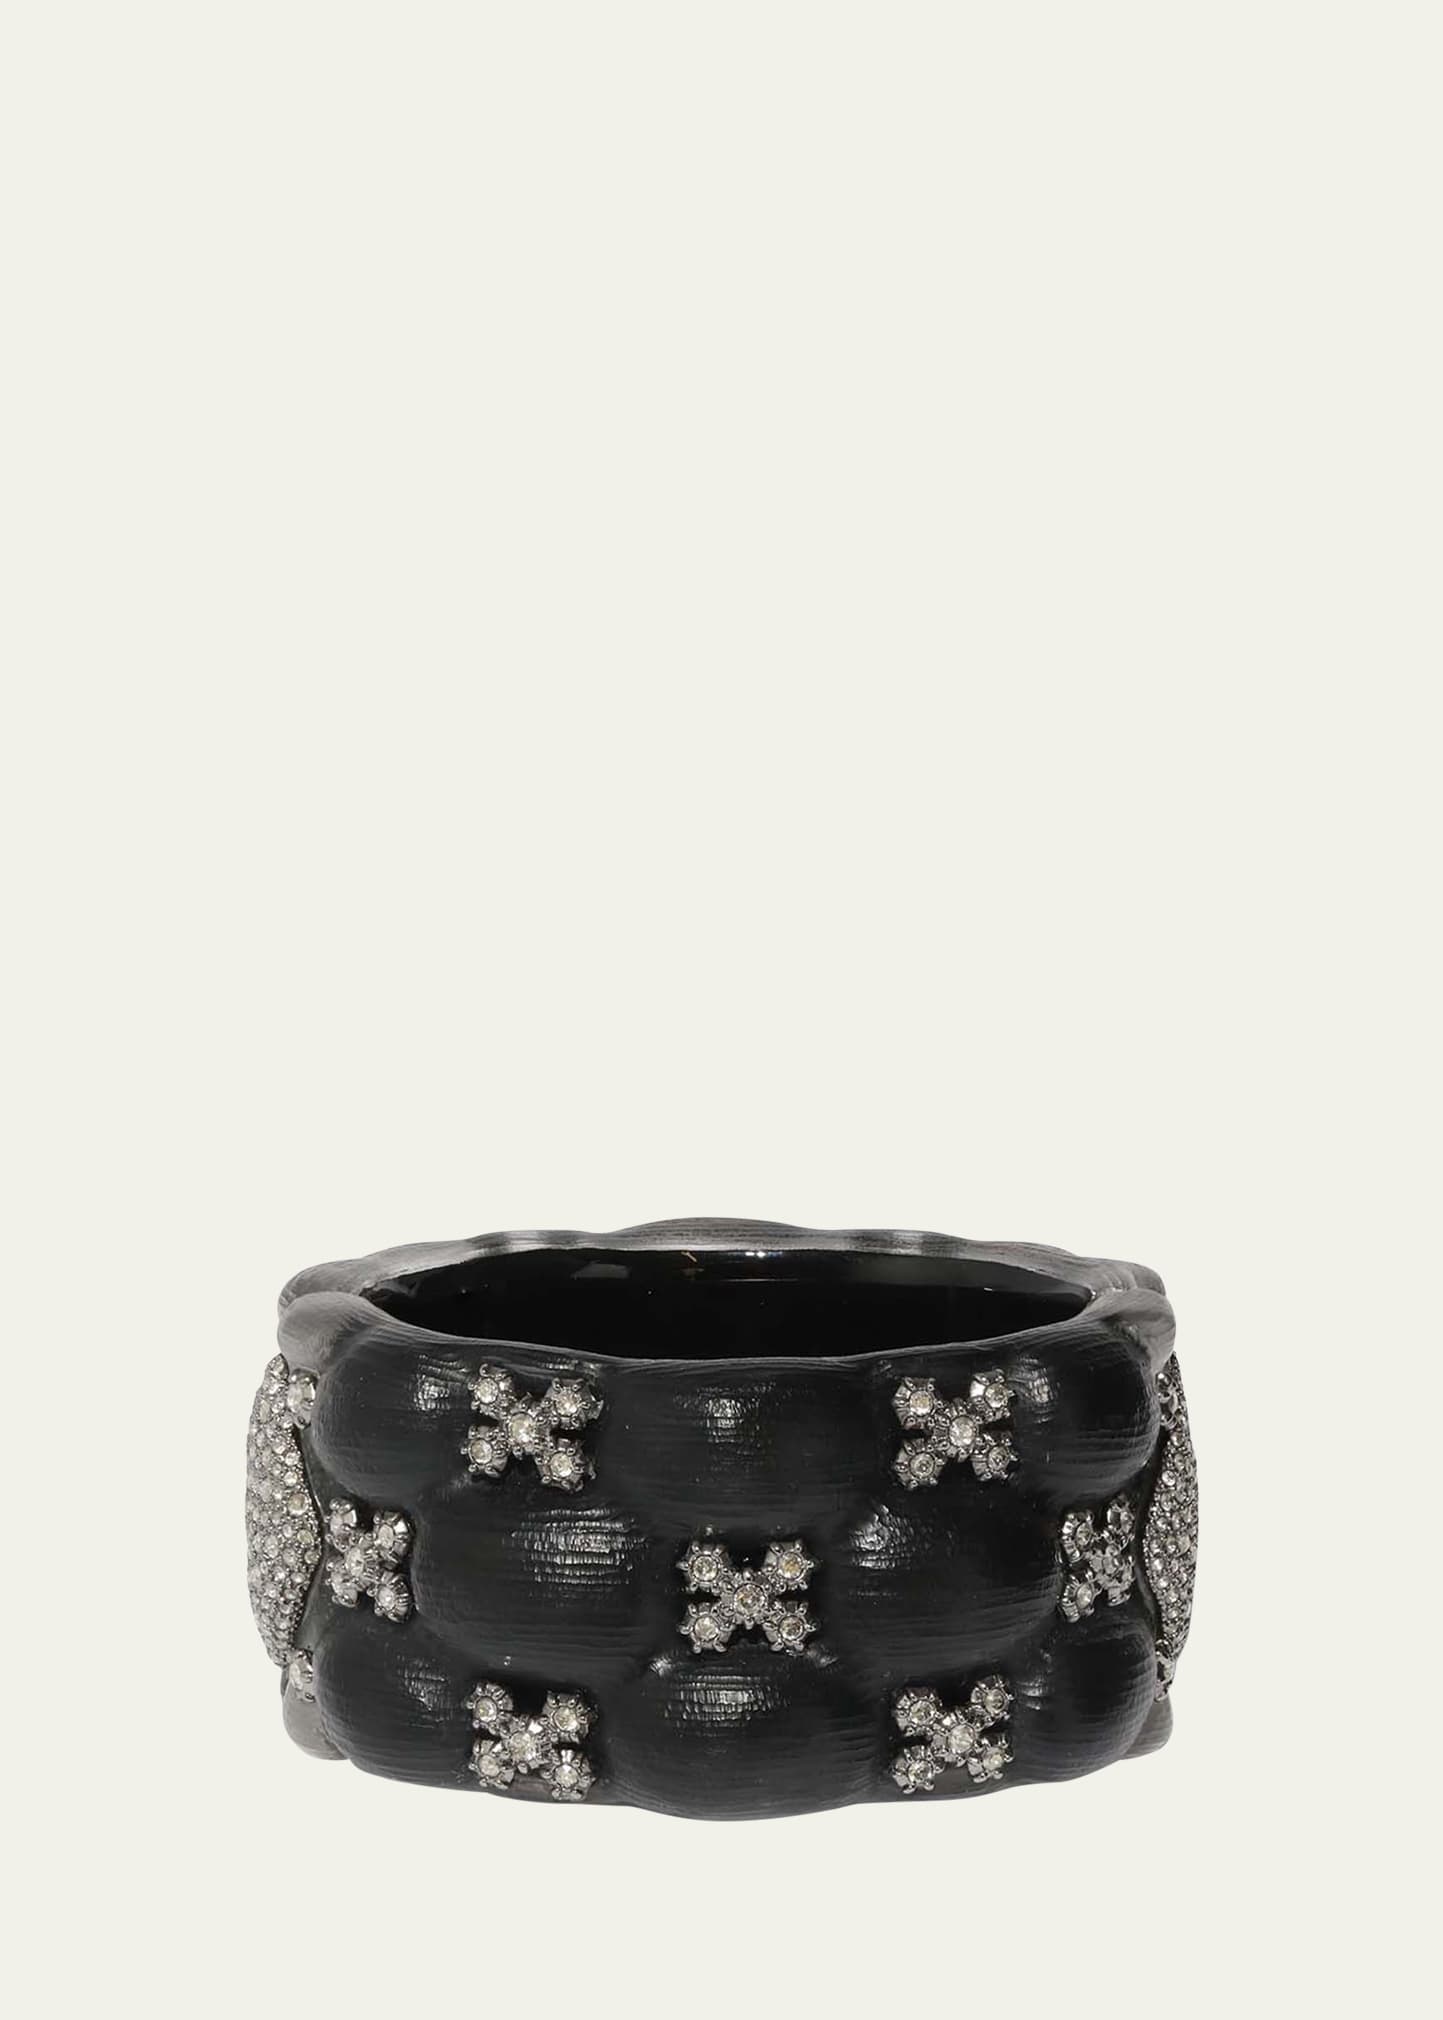 Alexis Bittar Punk Royale Quilted Lucite Crystal Bracelet In Black